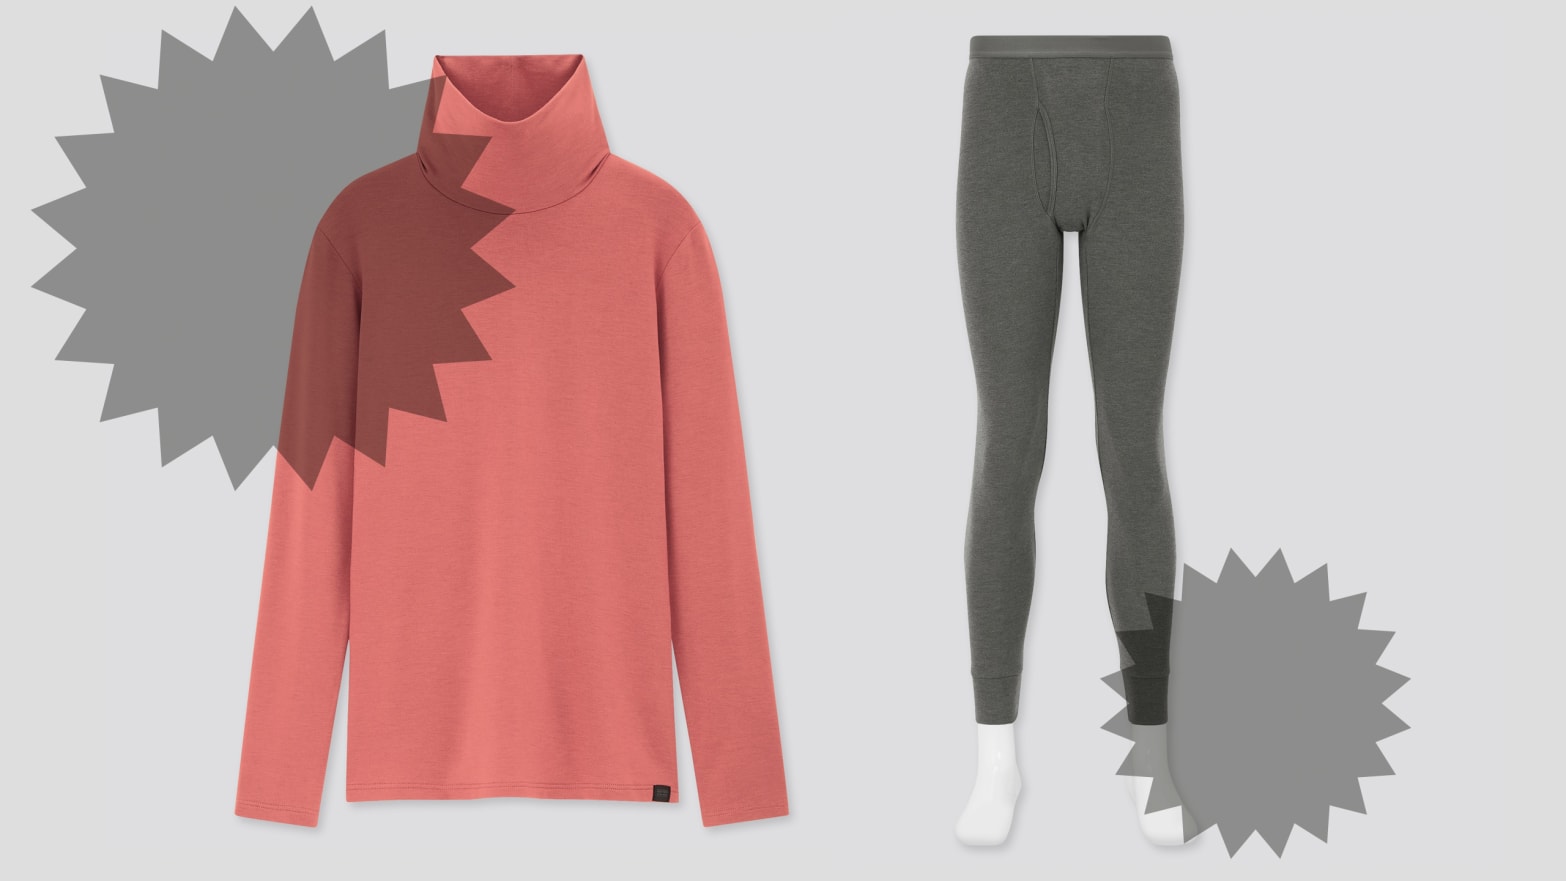 Uniqlo Singapore - Warm. Warmer. Warmest. As regular winter wear, HEATTECH  does the job perfectly. However, you'll need HEATTECH Extra Warm, which is  1.5 times warmer than regular HEATTECH for chillier weather